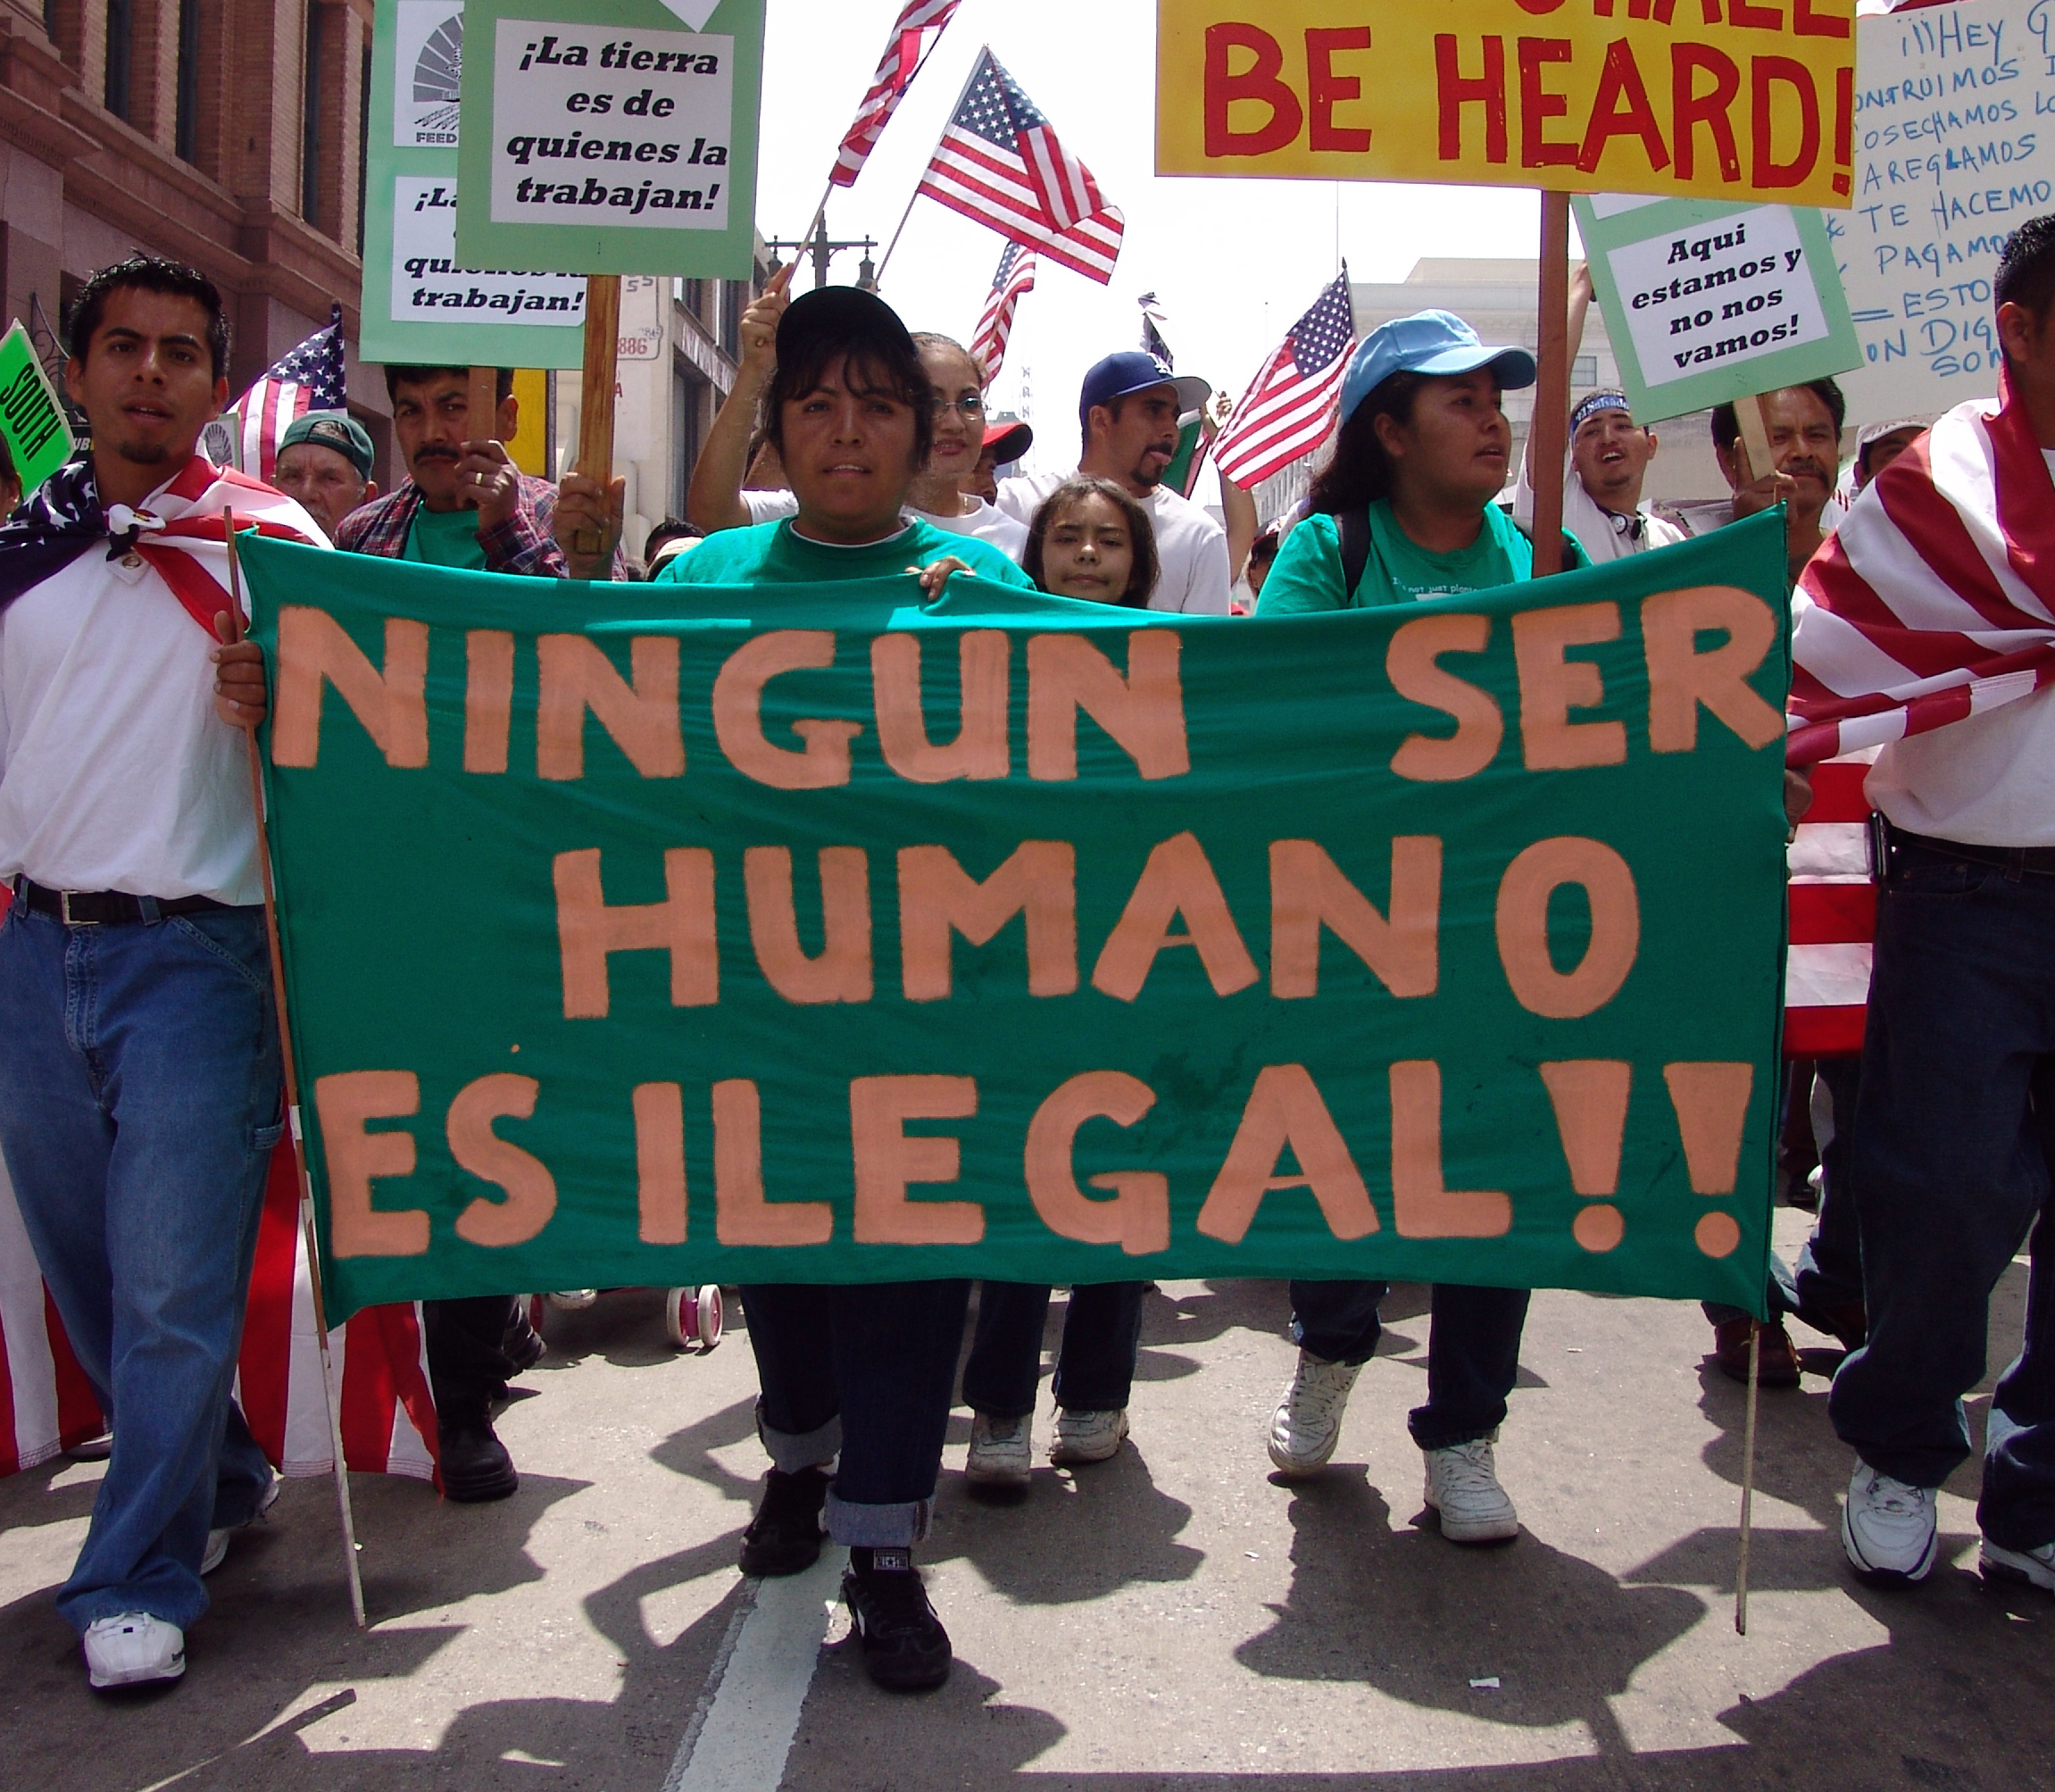 why should illegal immigration be stopped